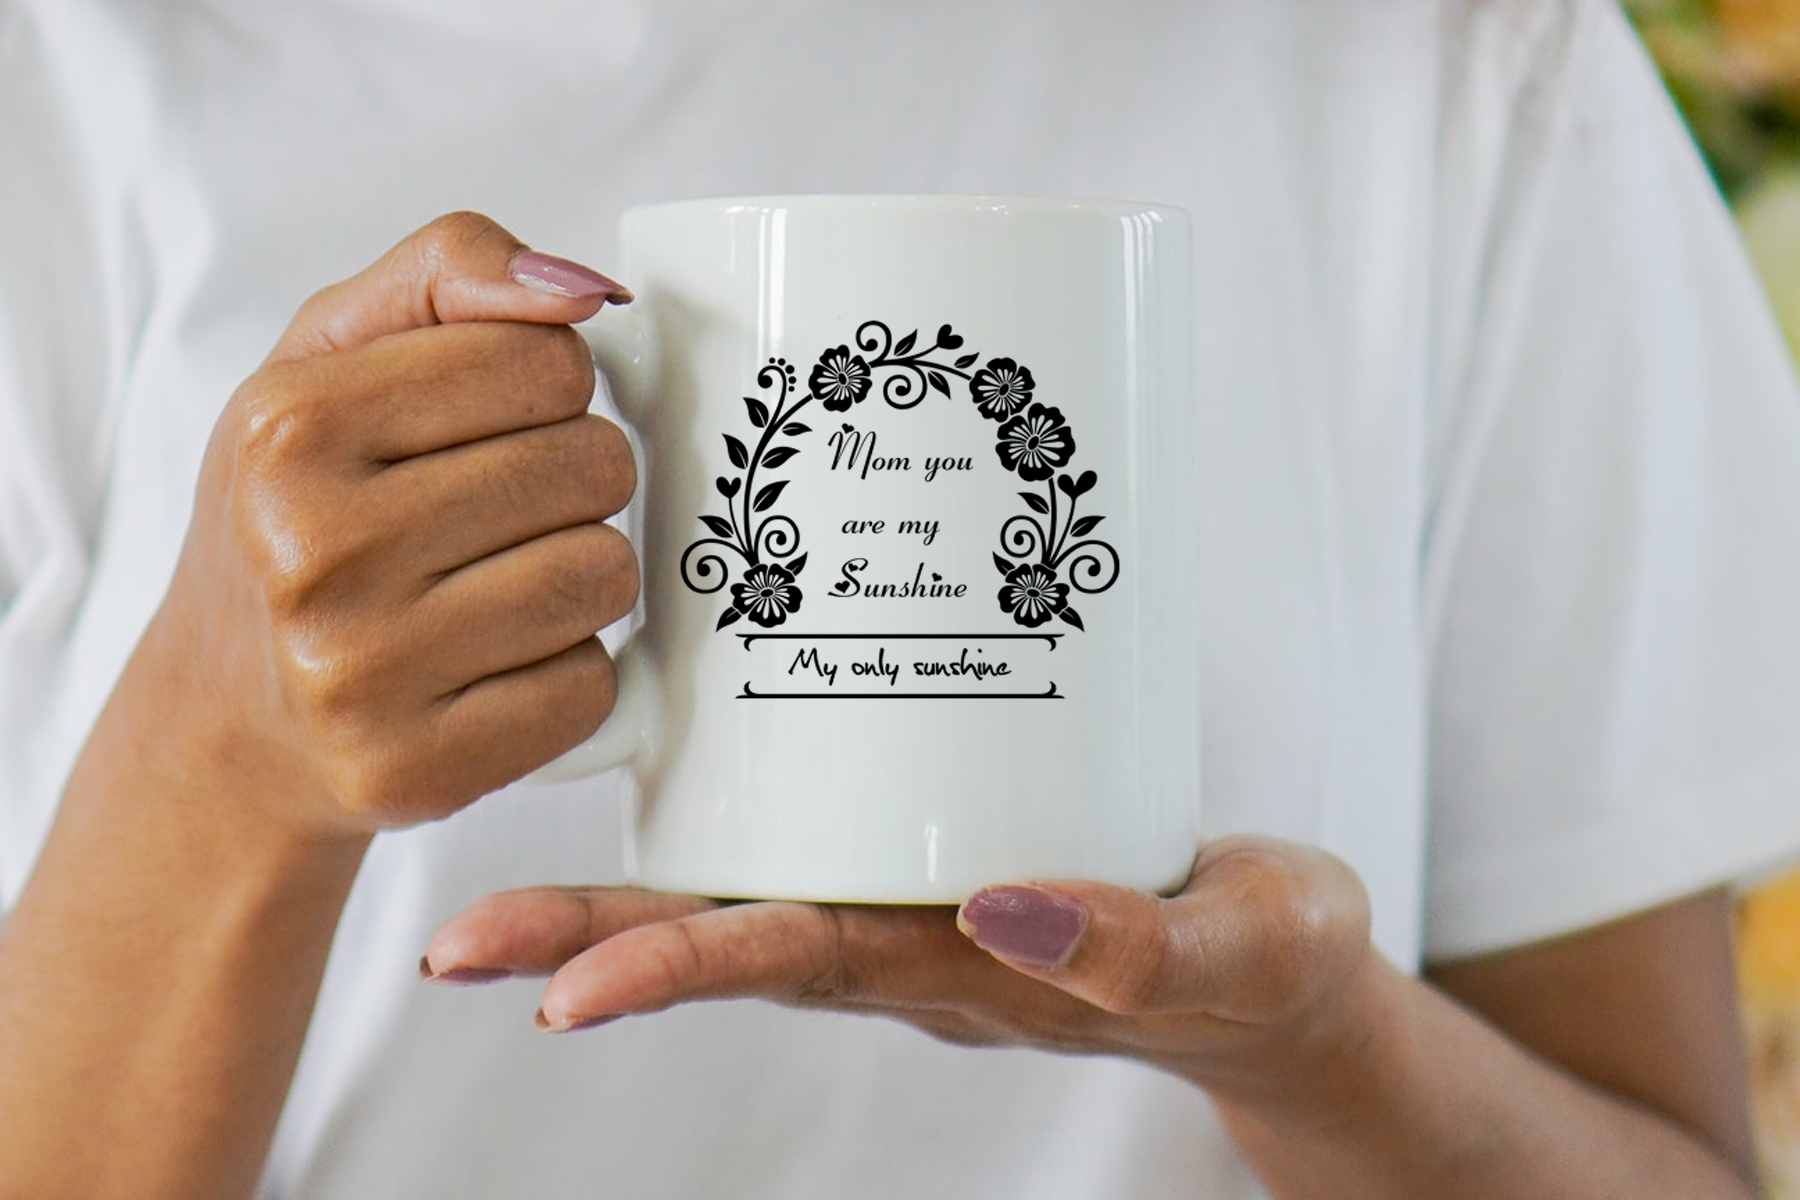 Woman holding a white coffee mug with a floral design.